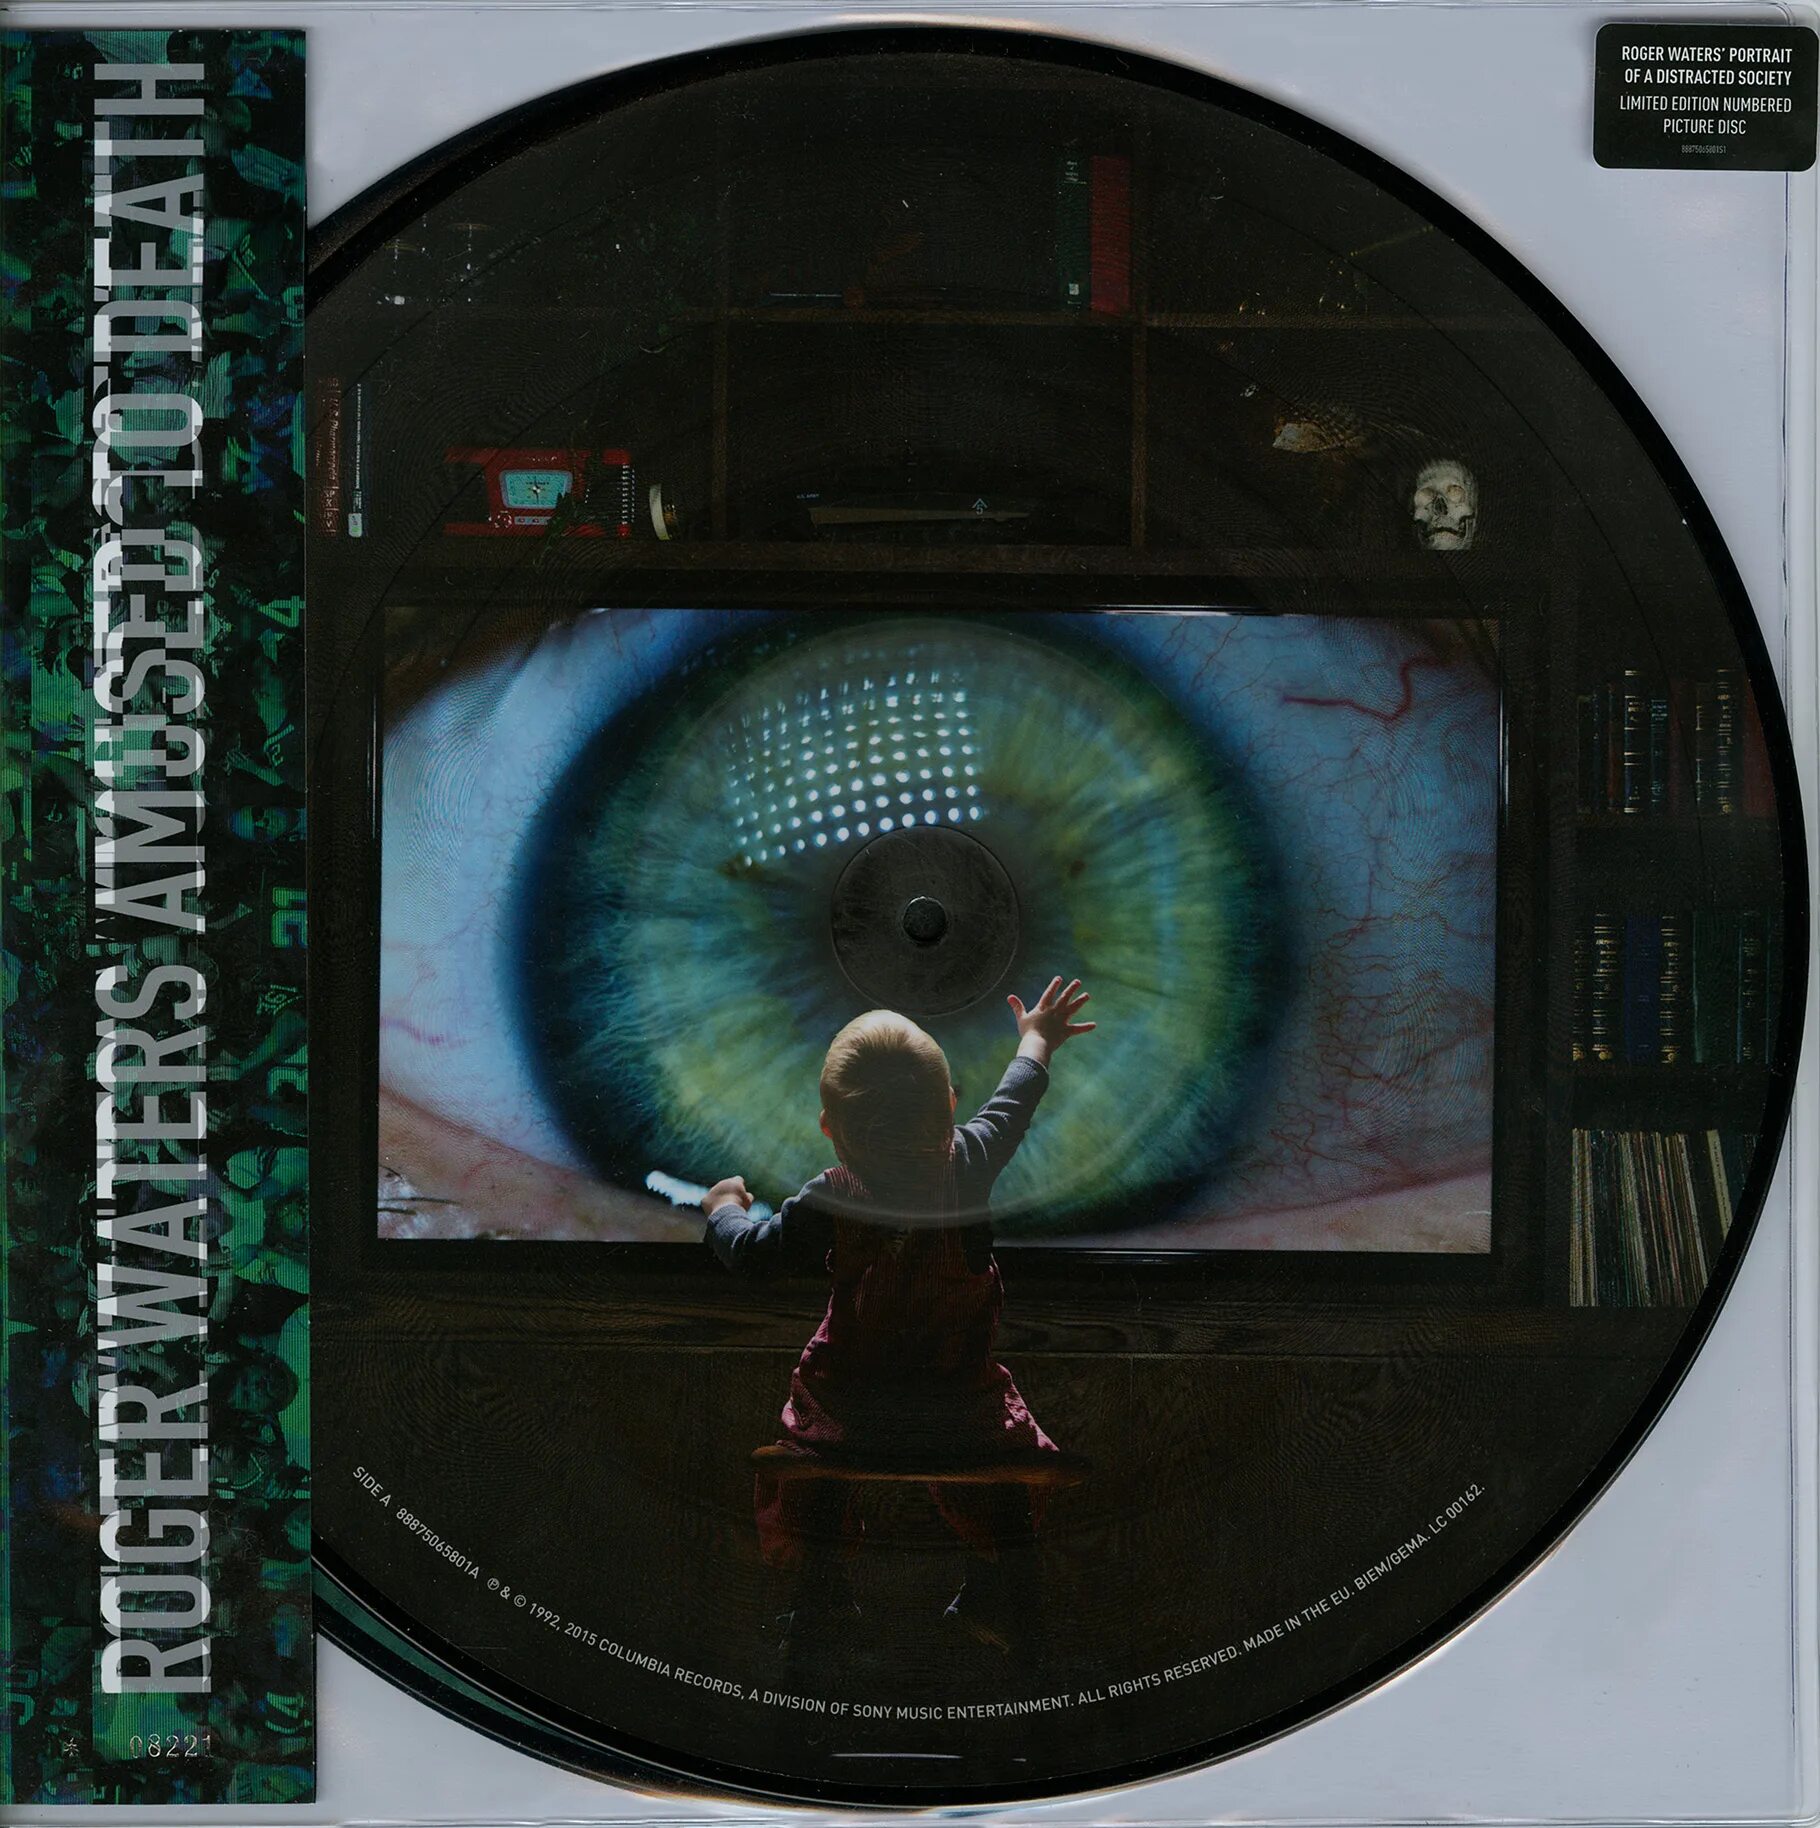 Amused to death. Roger Waters amused to Death 1992. Roger Waters дискография. Amused to Death Роджер Уотерс. Roger Waters LP.